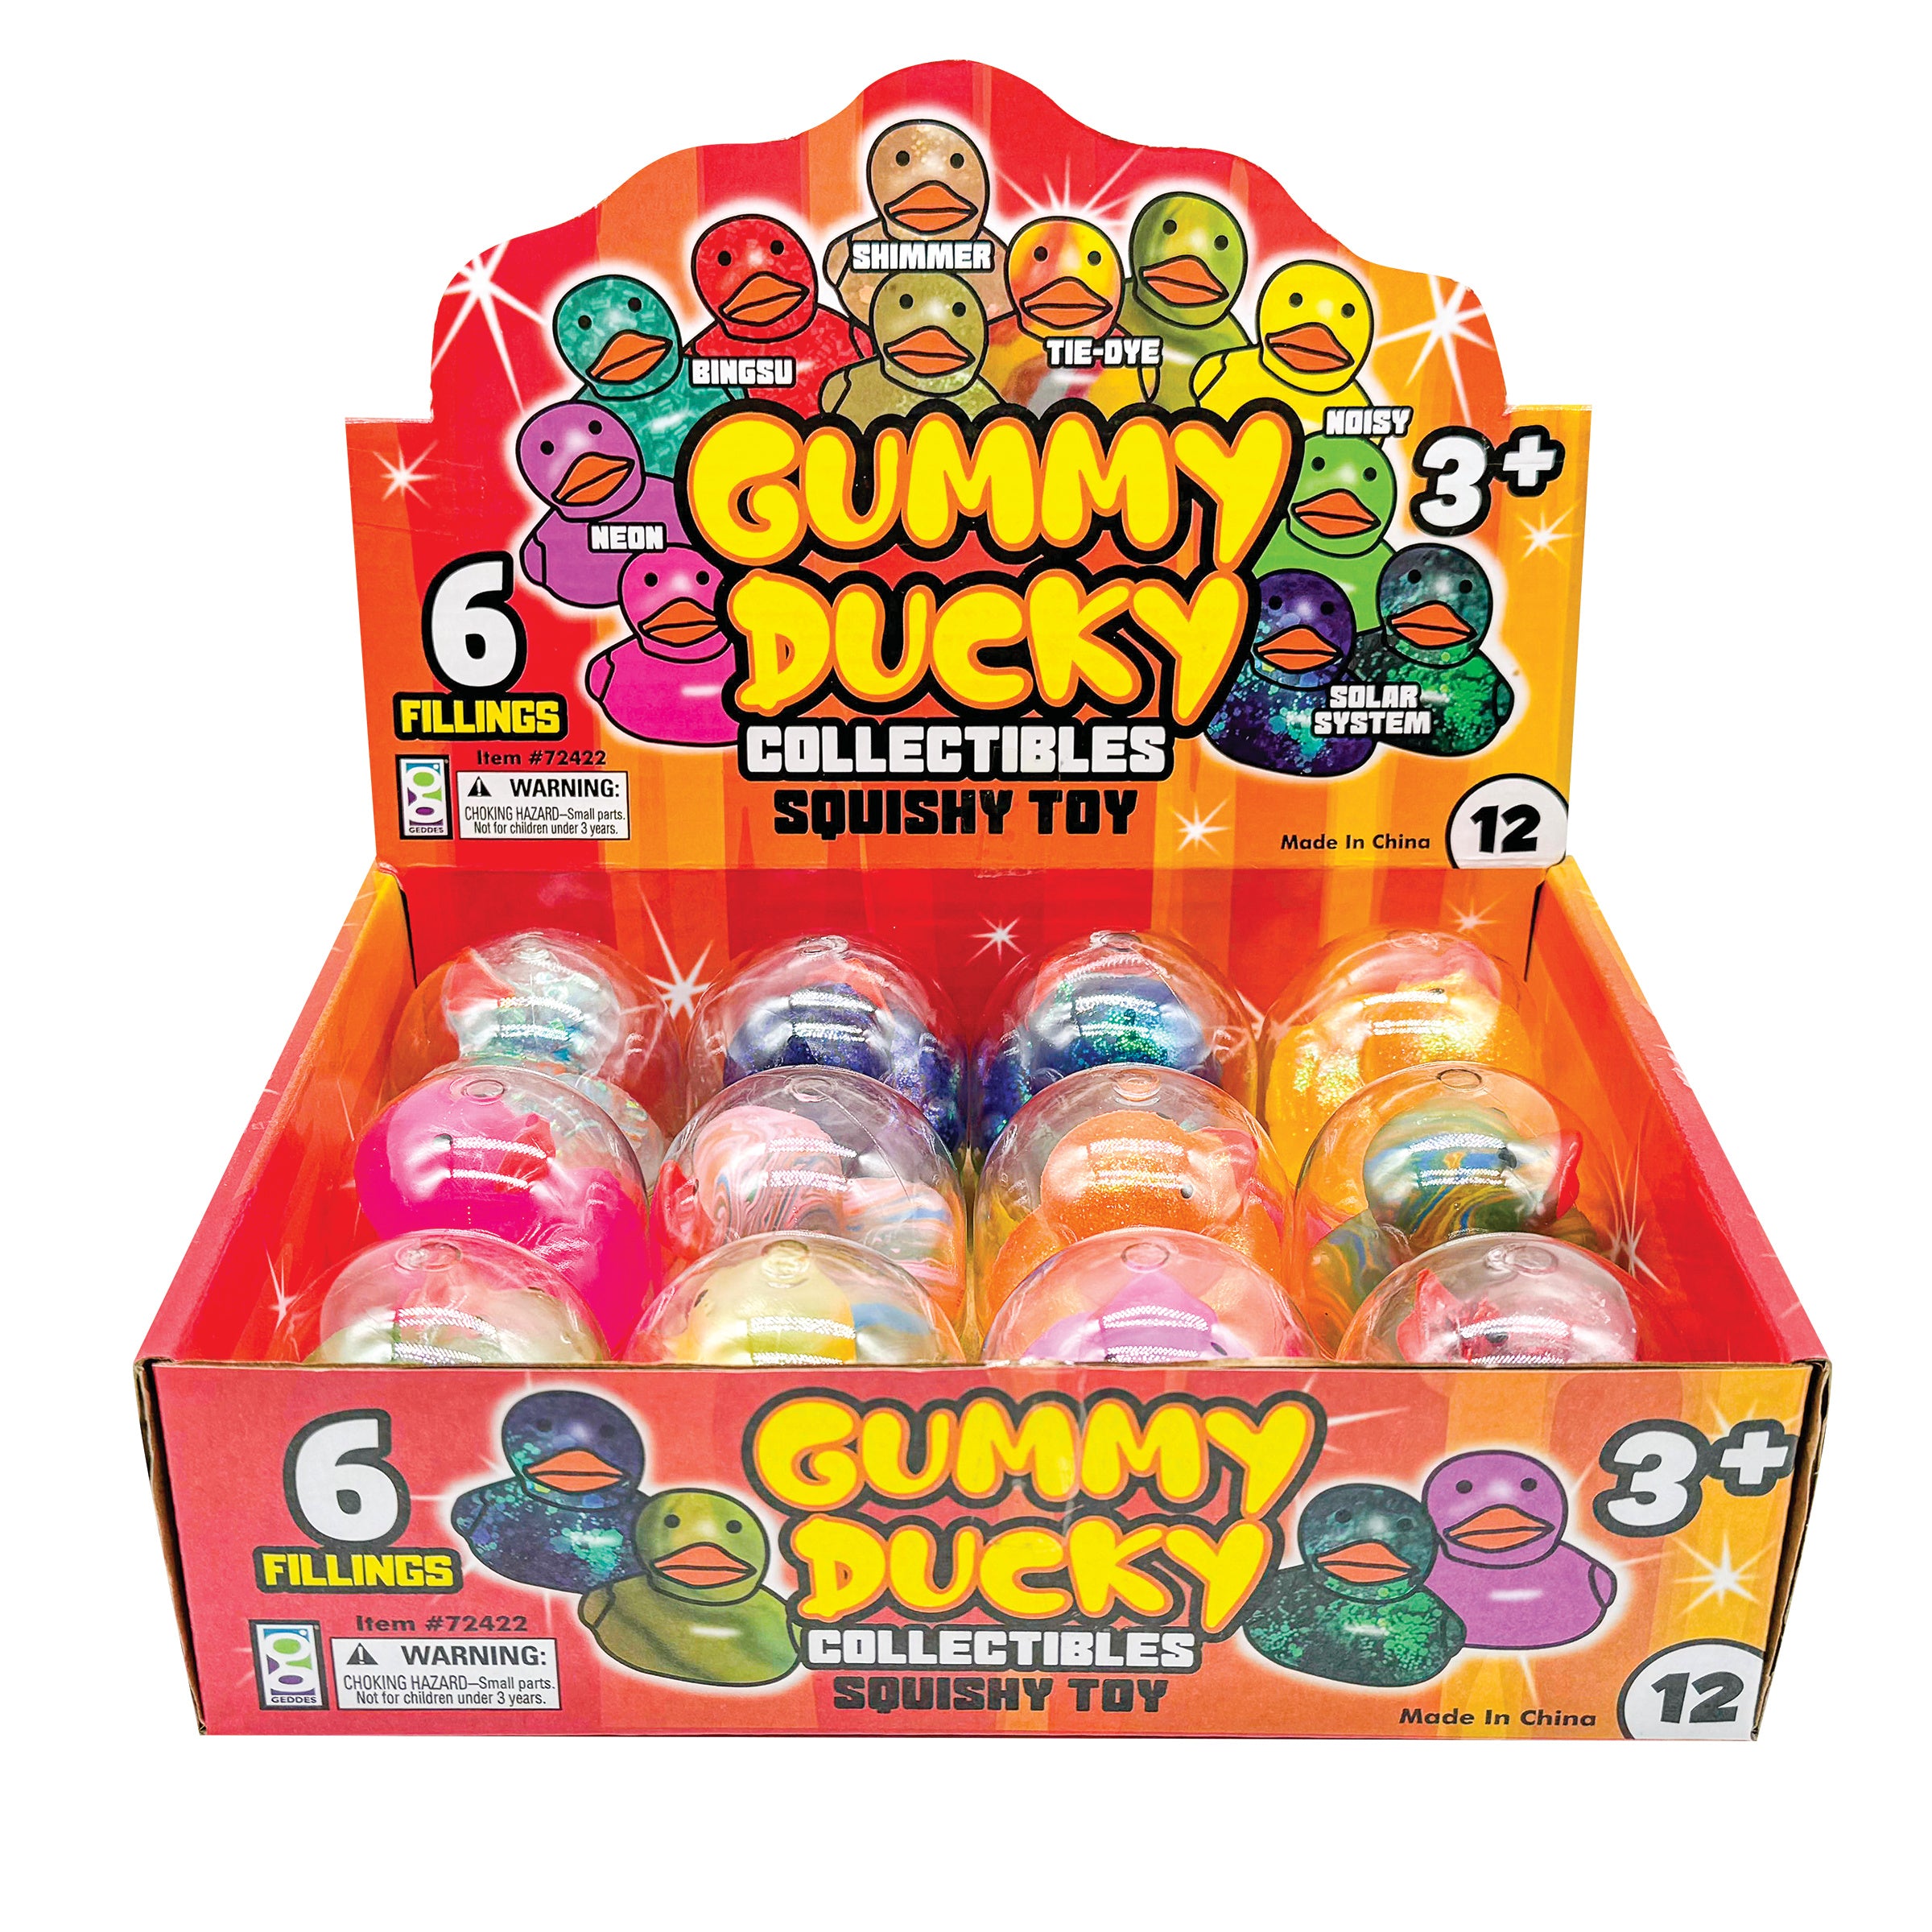 Gummy Ducky Collectible Squishy Toys